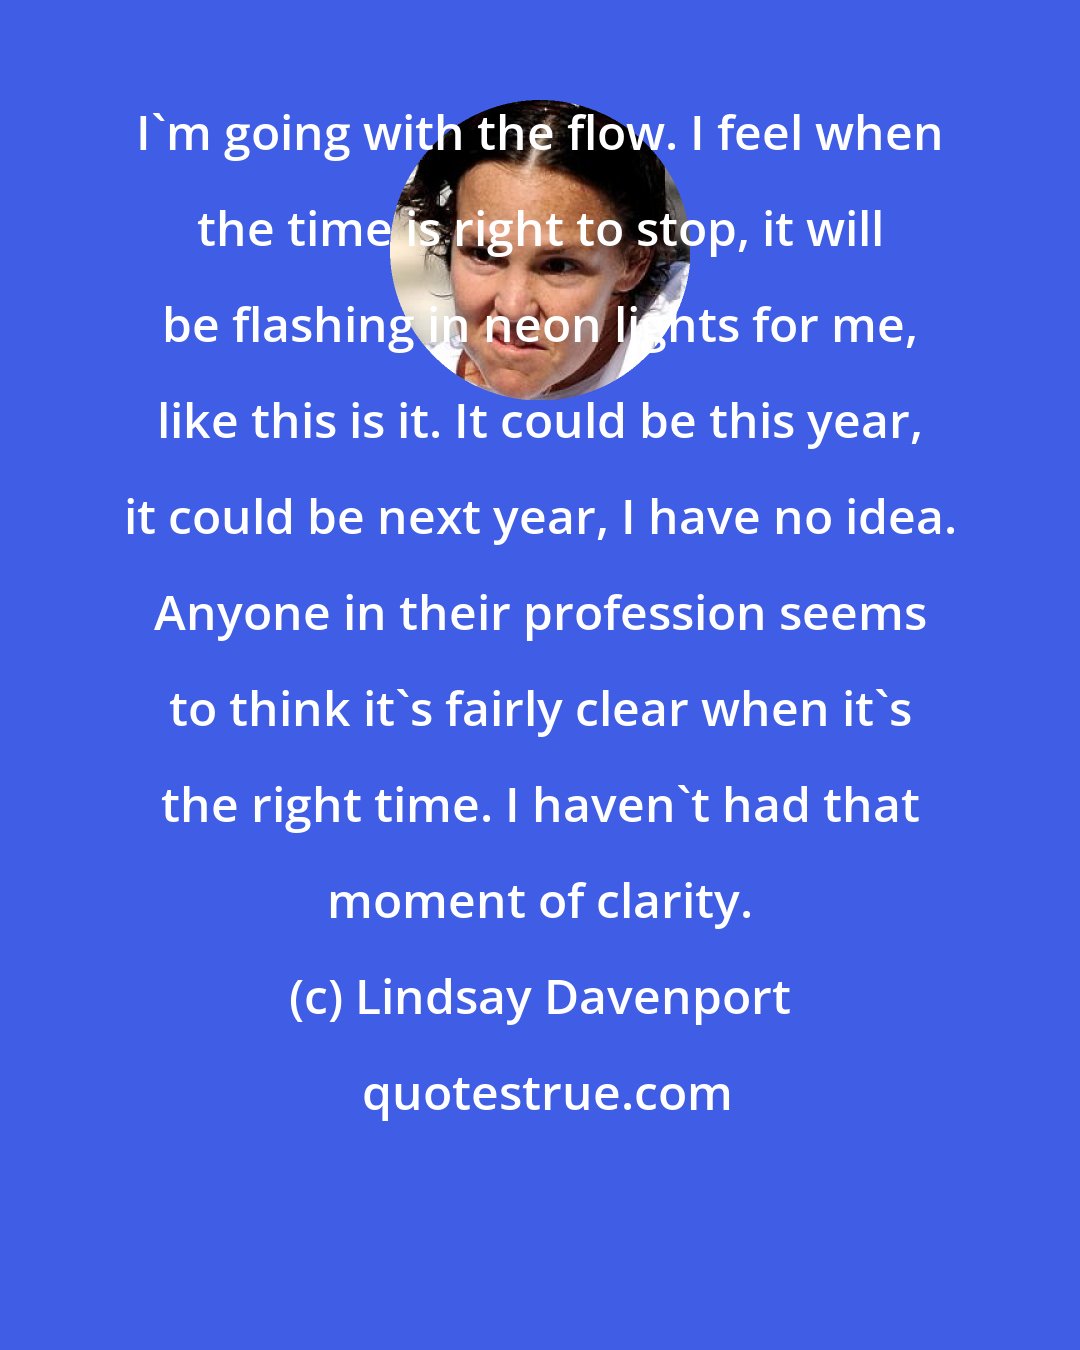 Lindsay Davenport: I'm going with the flow. I feel when the time is right to stop, it will be flashing in neon lights for me, like this is it. It could be this year, it could be next year, I have no idea. Anyone in their profession seems to think it's fairly clear when it's the right time. I haven't had that moment of clarity.